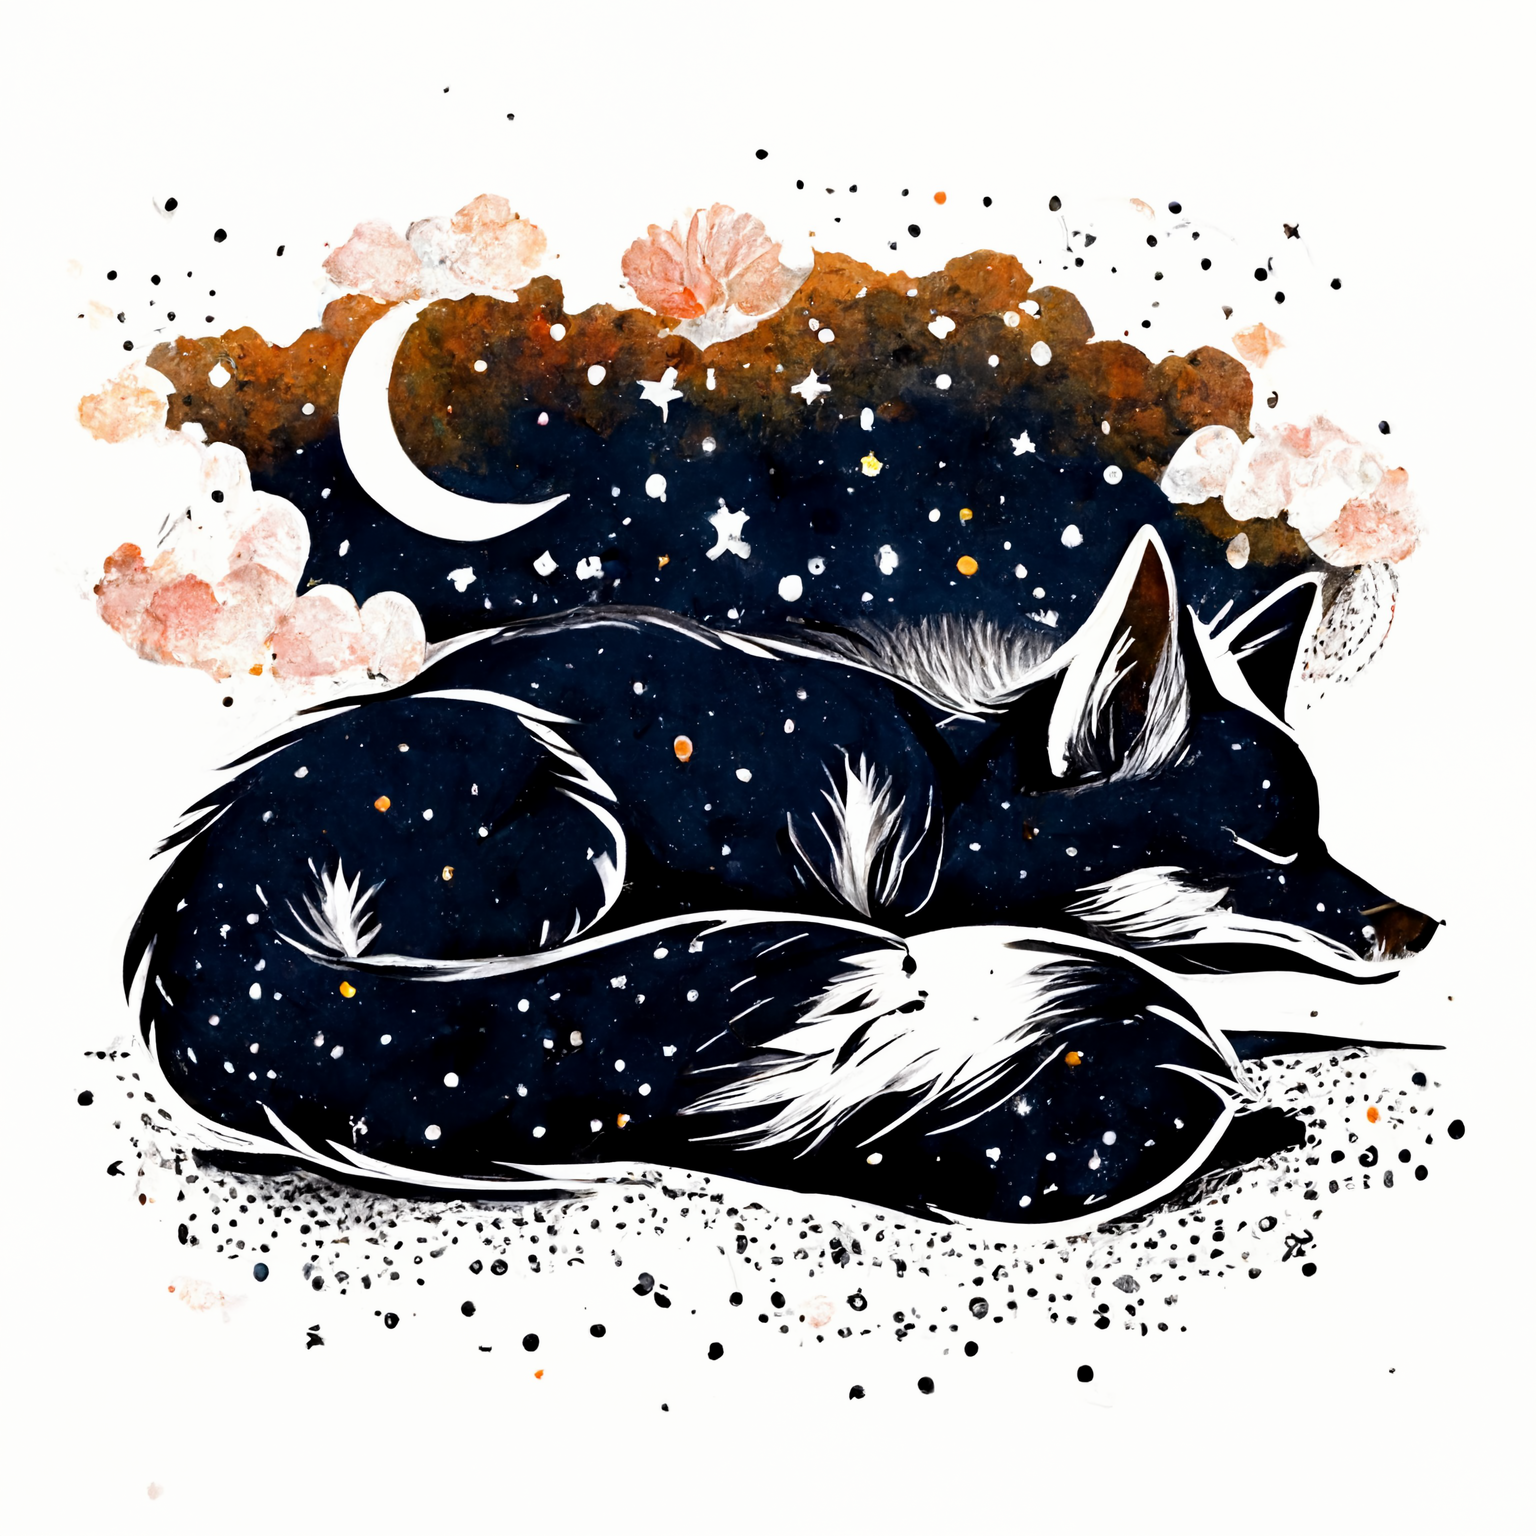 Ink Vector Painting Print of a Dreaming Fox Amidst a Starry Sky: An Anime Print Design